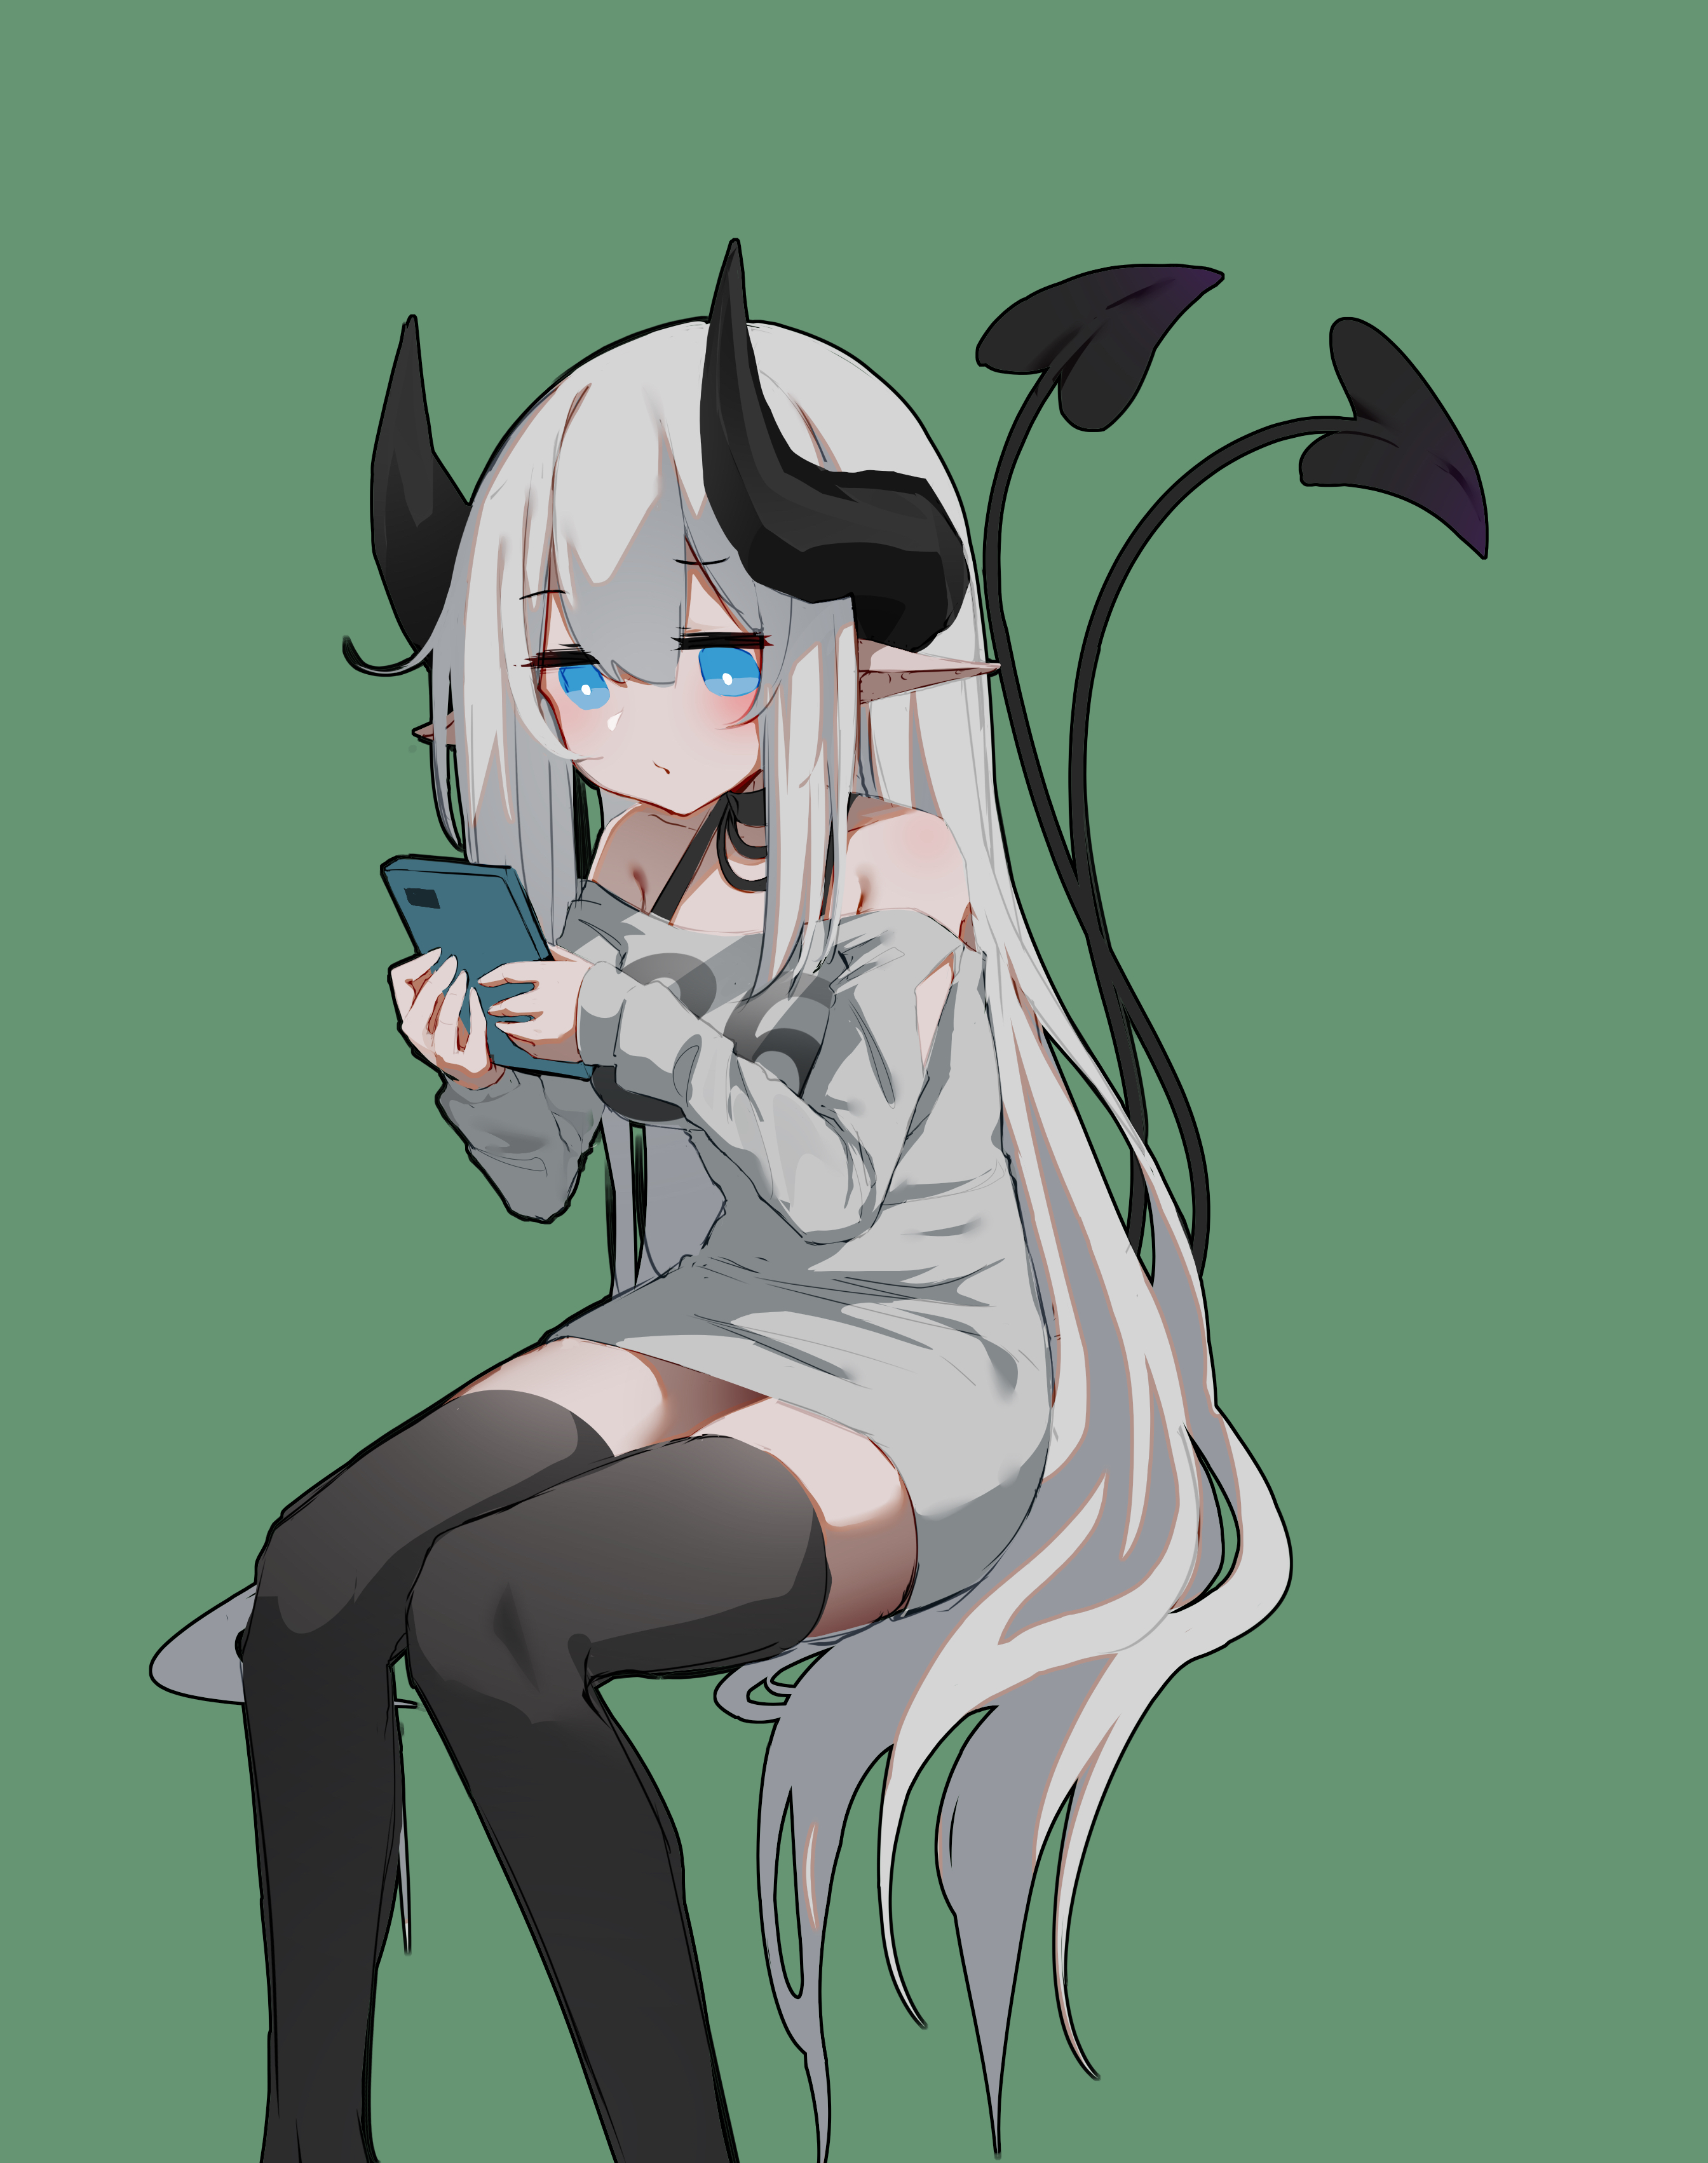 Anime 2688x3404 The sound of painting anime anime girls portrait display demon girls demon tail demon horns stockings phone pointy ears green background simple background minimalism